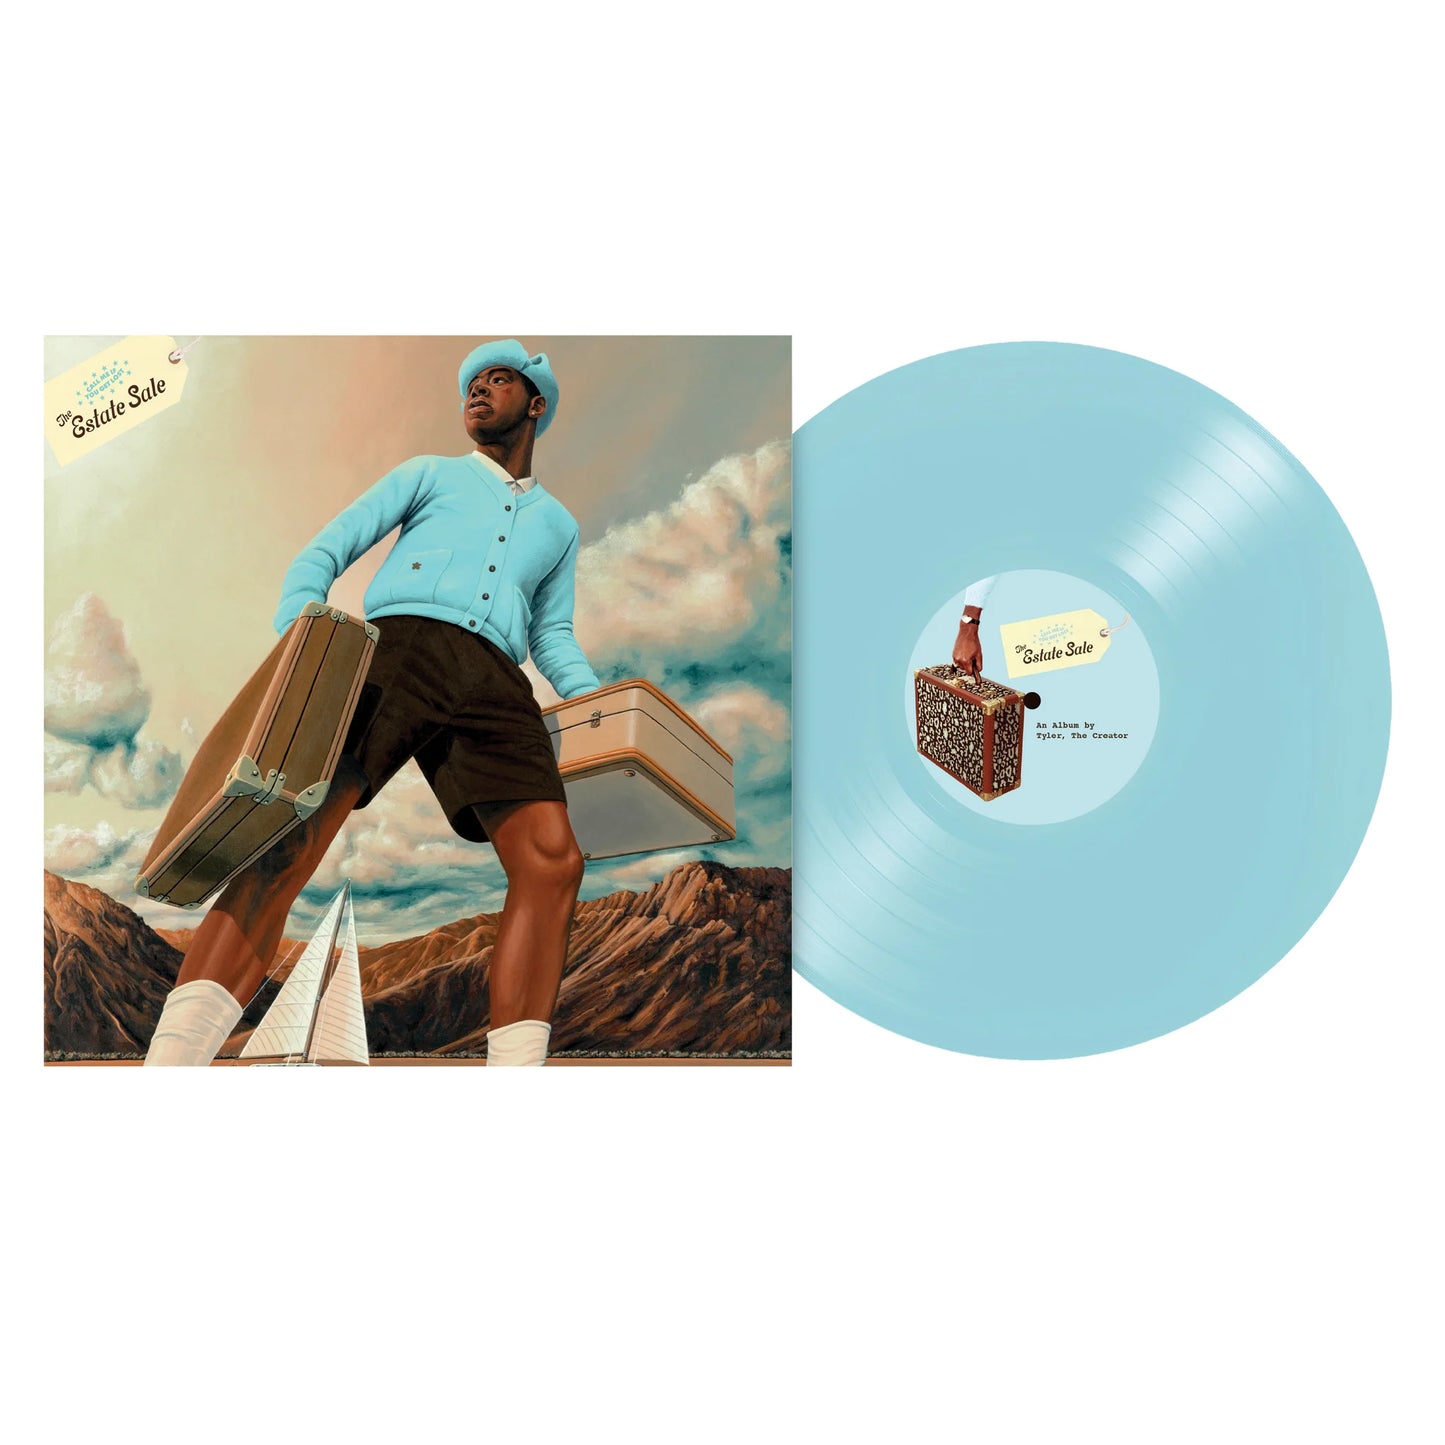 Tyler, The Creator - Call Me If You Get Lost The Estate Sale